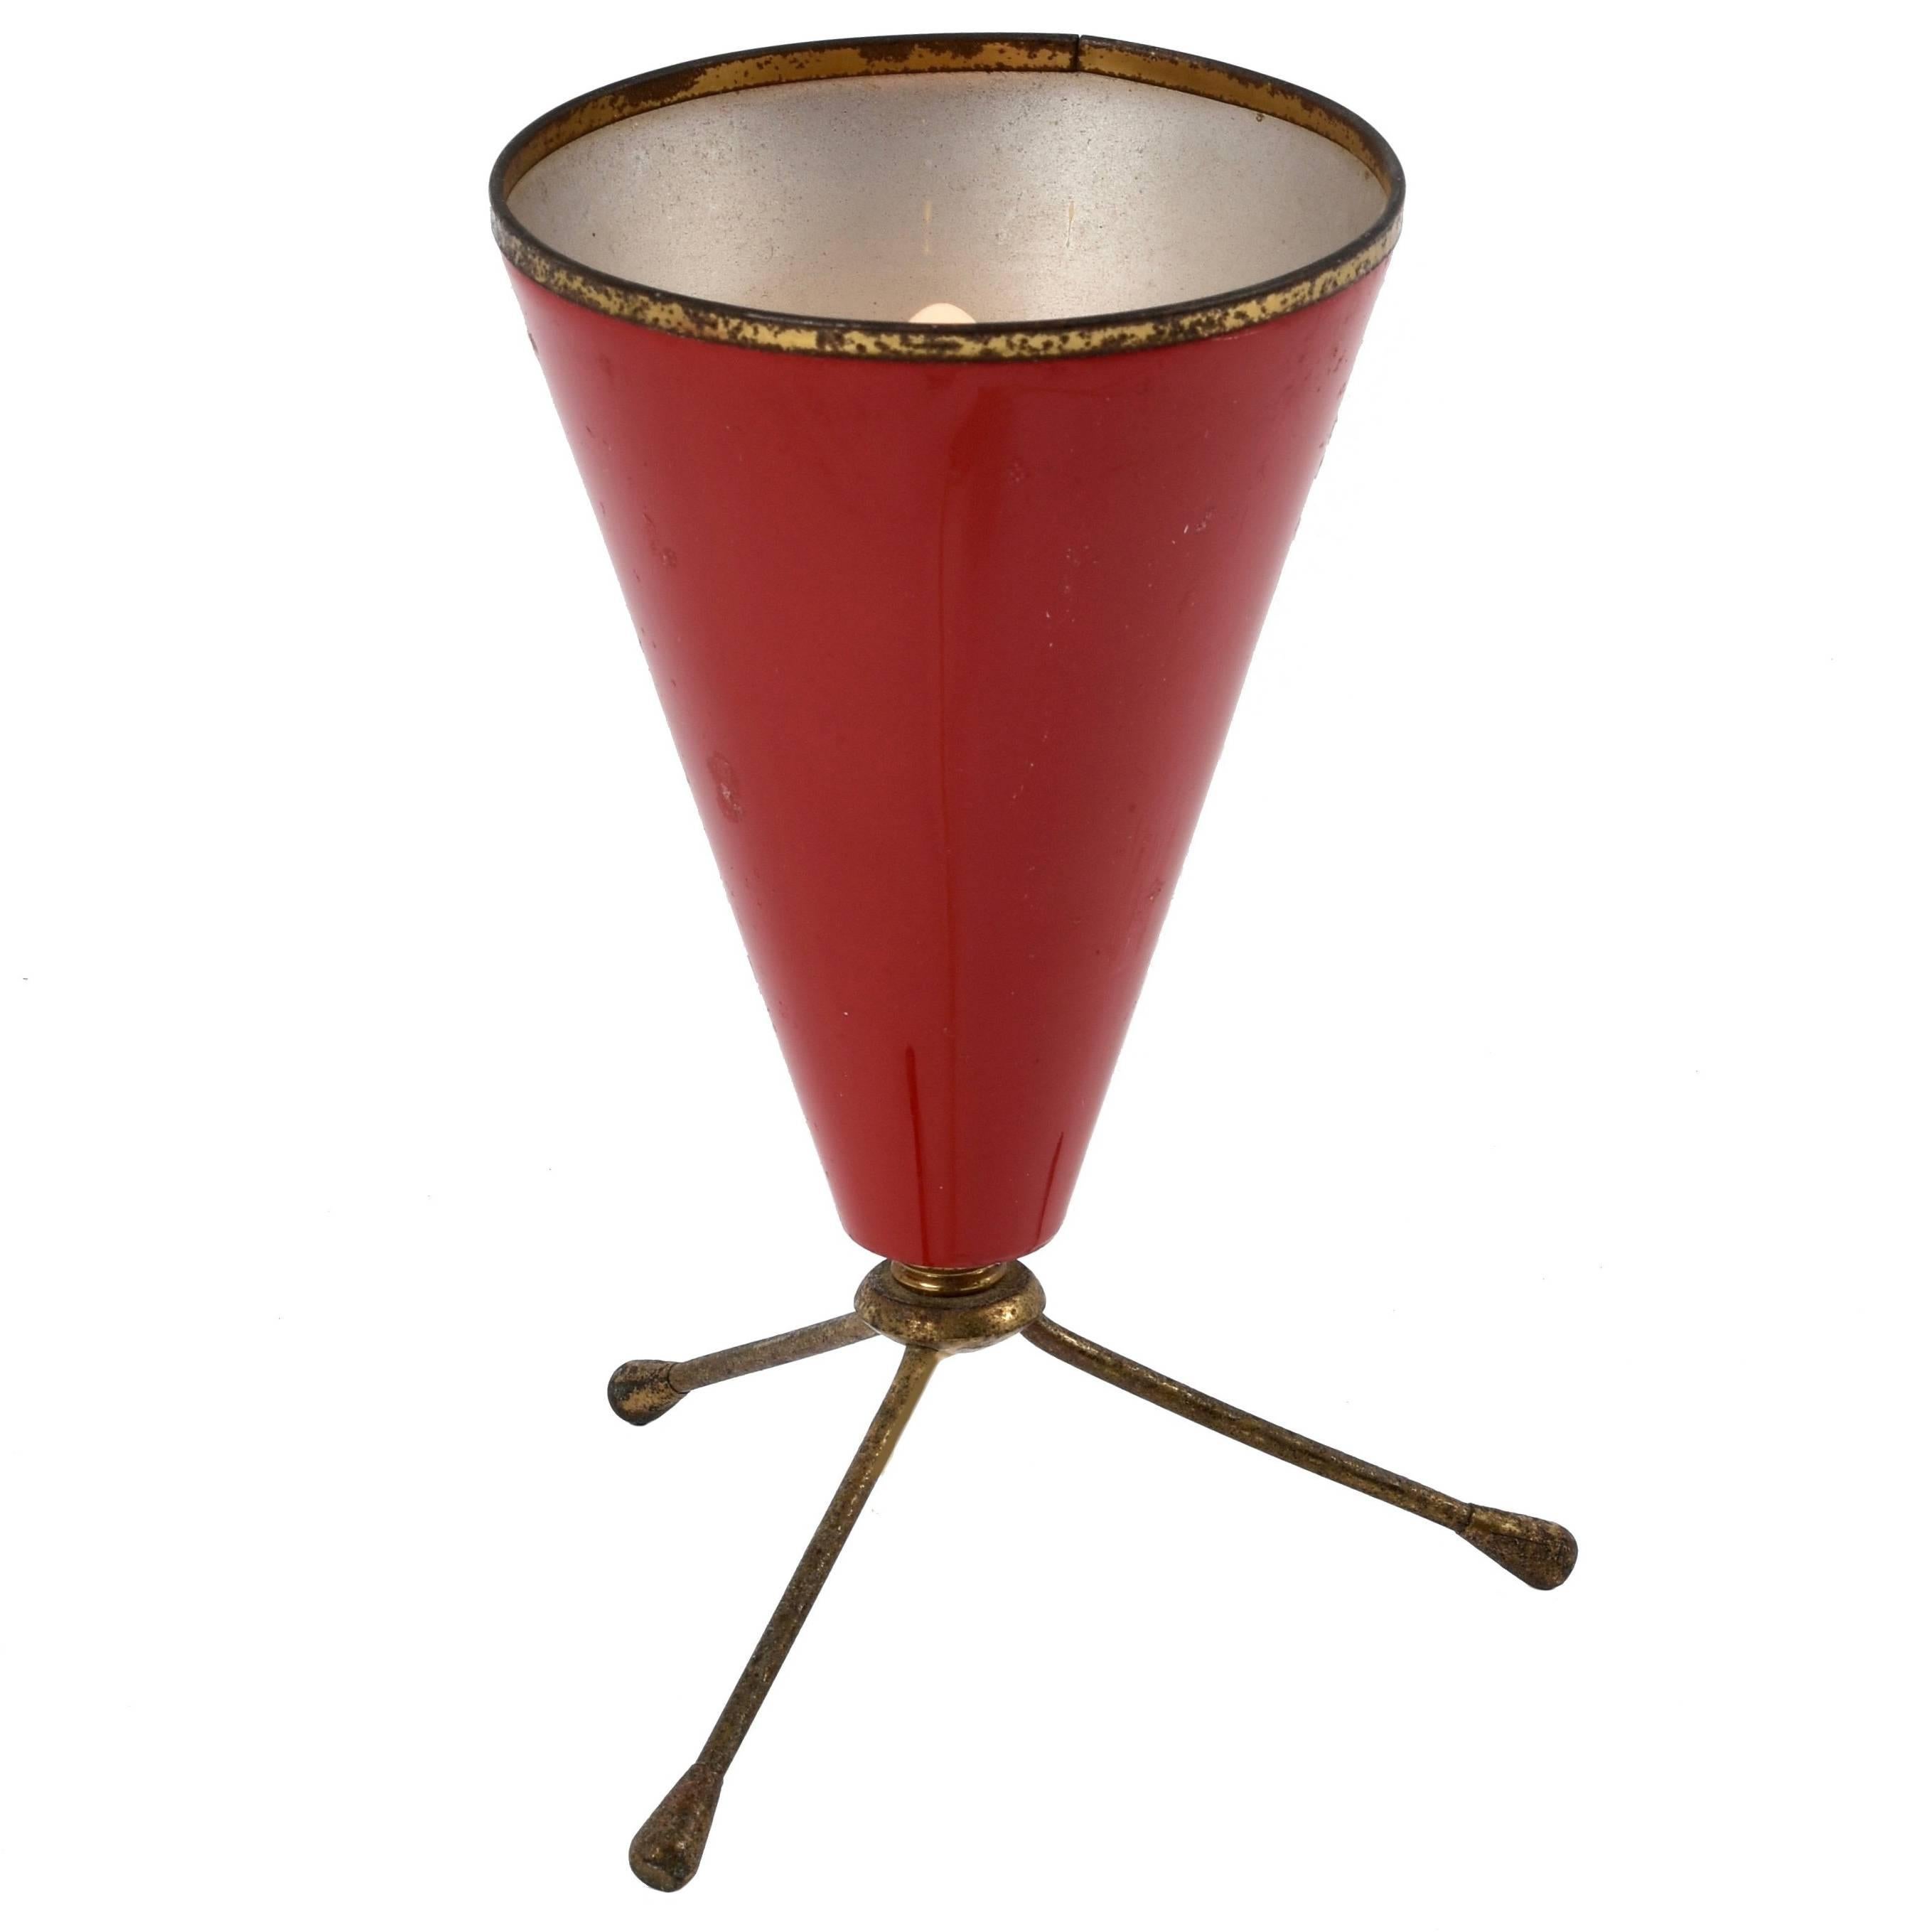 Conical Table Lamp in Red Lacquered Metal and Brass, 1950s Italian Tripode